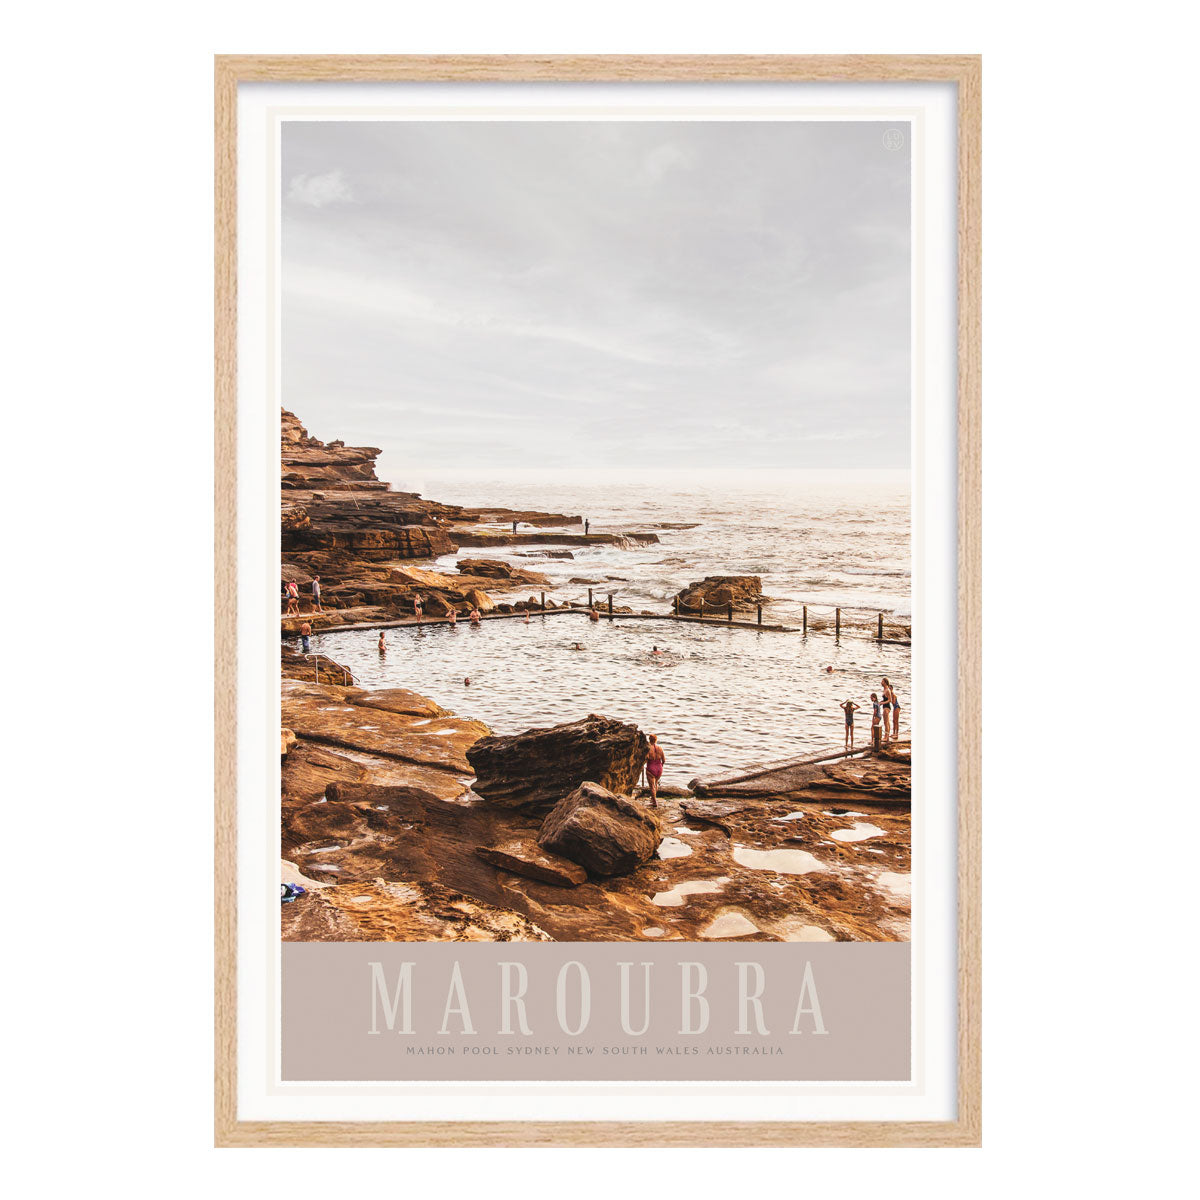 Maroubra Mahon Pool vintage retro travel poster print in oak frame by places we luv